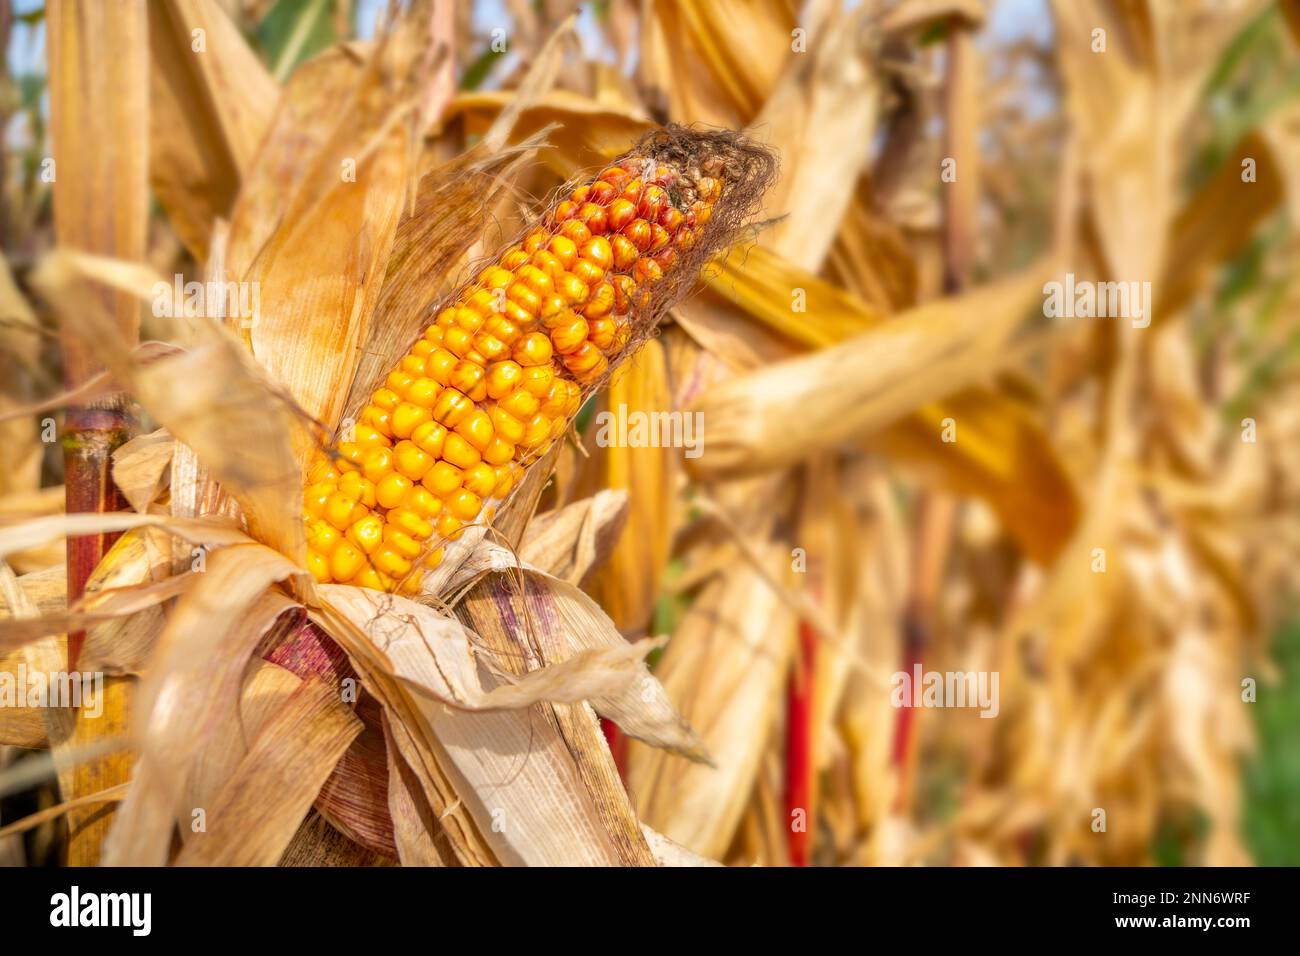 climate change with heat and dryness Stock Photo